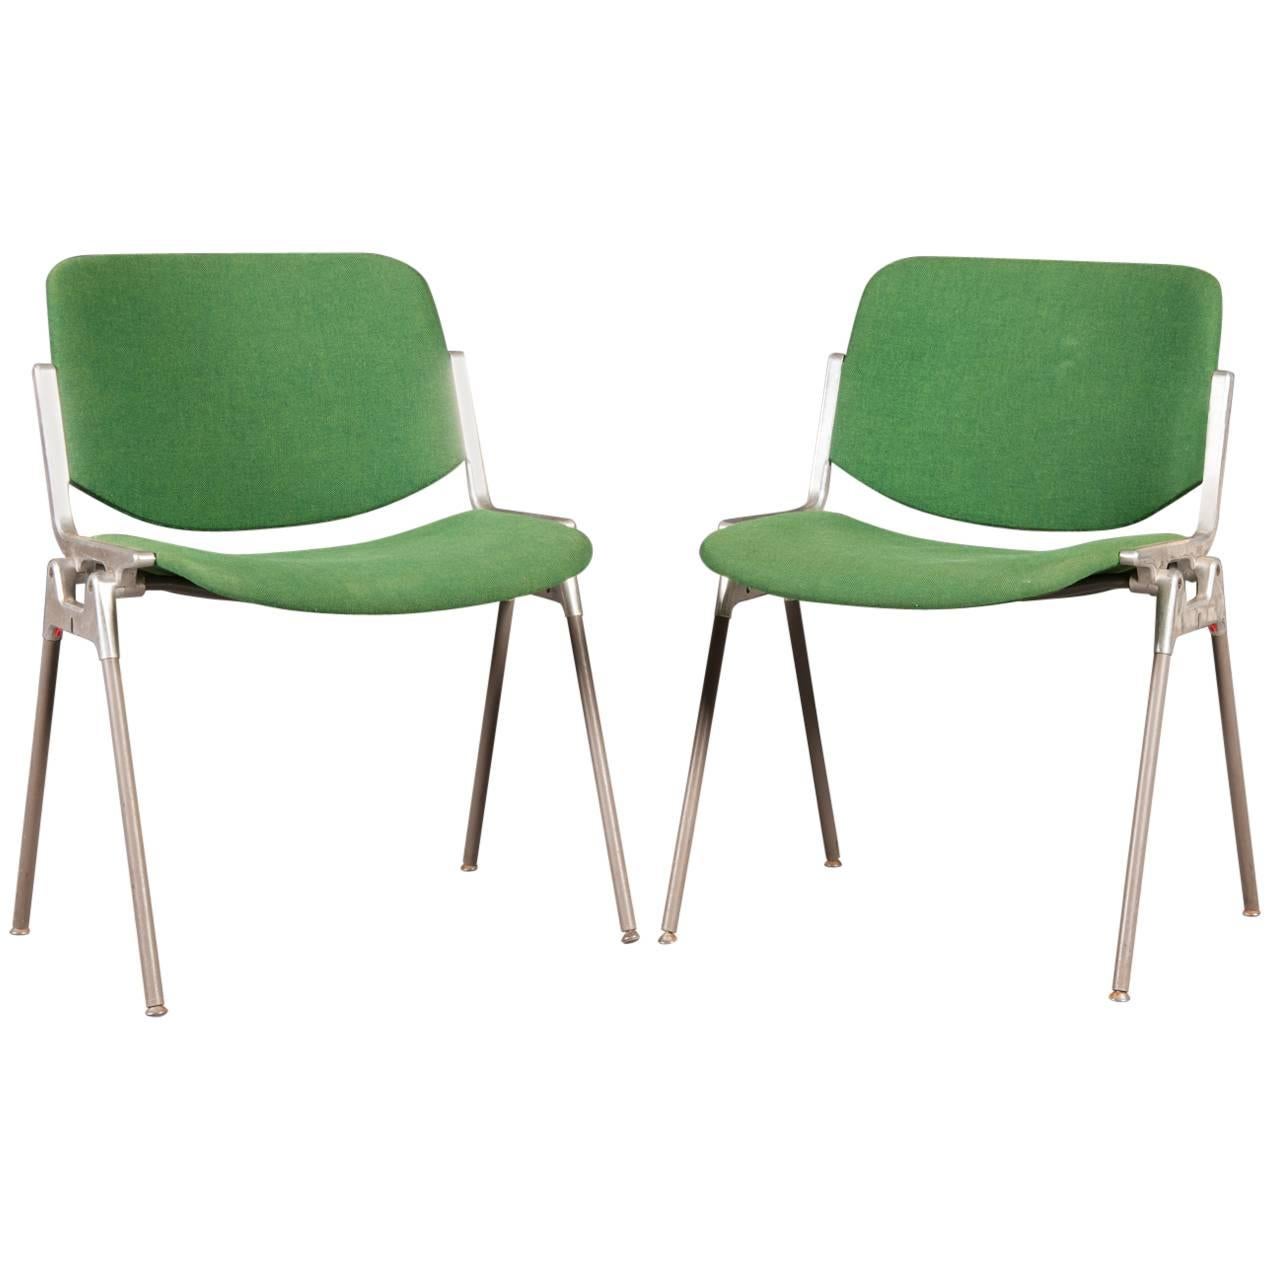 Green Stackable Chairs by Giancarlo Piretti for Castelli